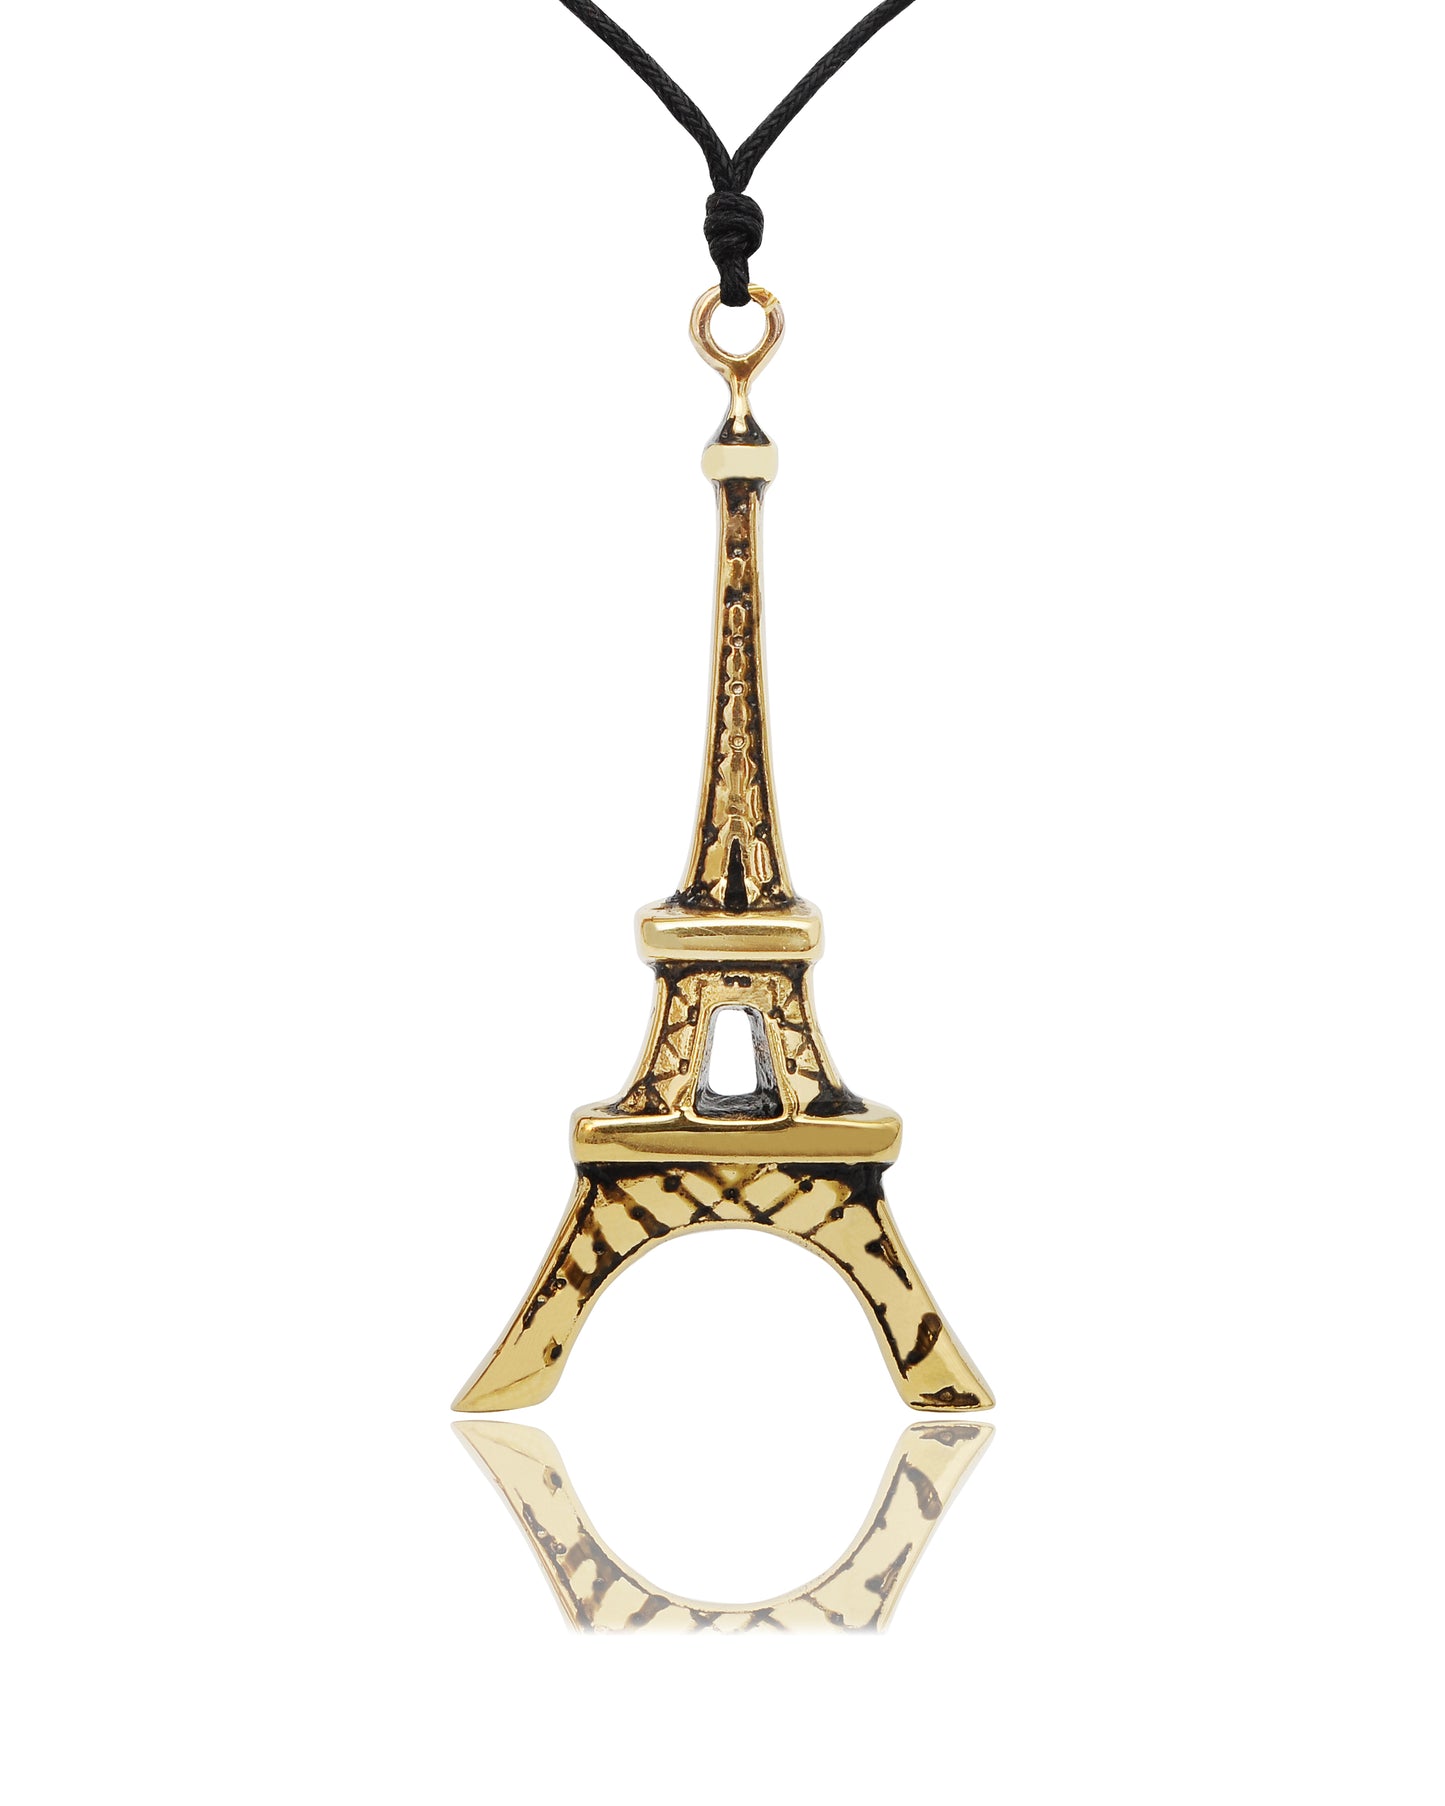 Eiffel Tower Paris Silver Pewter Necklace Pendant Jewelry